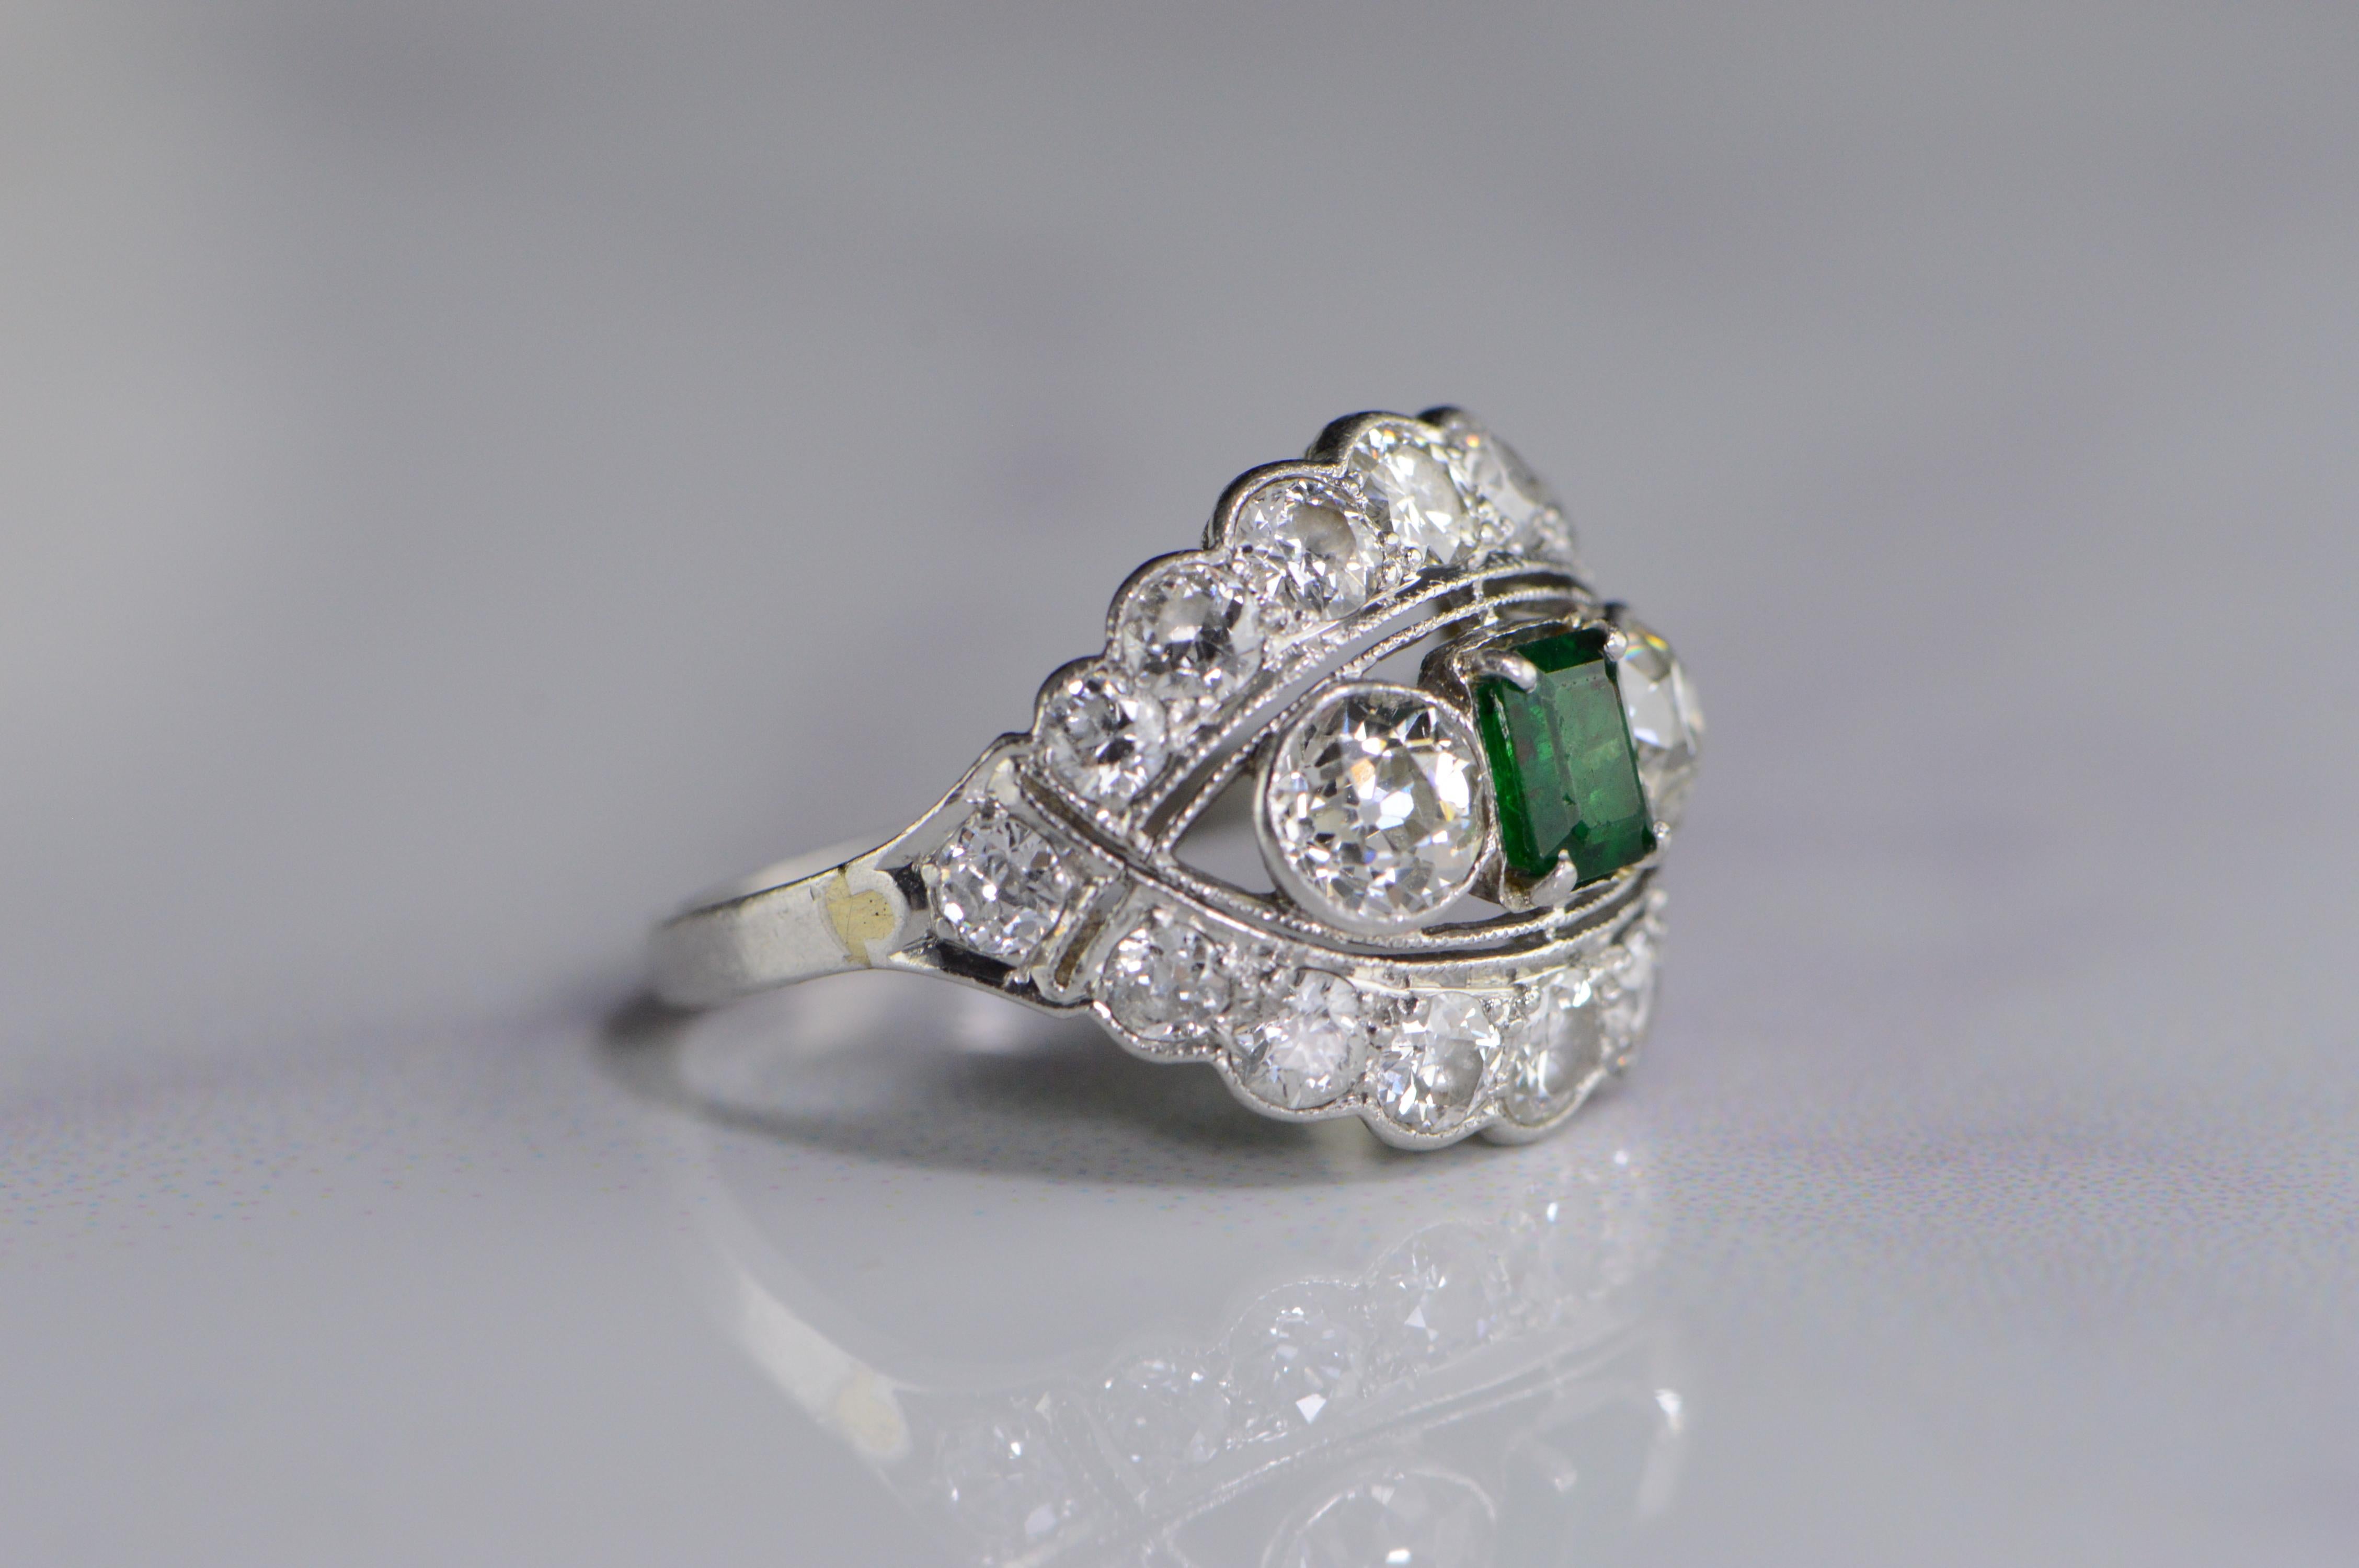 4 Carat Emerald Diamond Art Deco Engagement Ring - 0.50 Ct Emerald & 3.50 Ctw 18 Old Mine Cut Diamonds H-I, VS-SI. Crafted in platinum, the ring is currently a size 5.75 however it could be easily sized, free of charge 2-3 sizes up or down. The